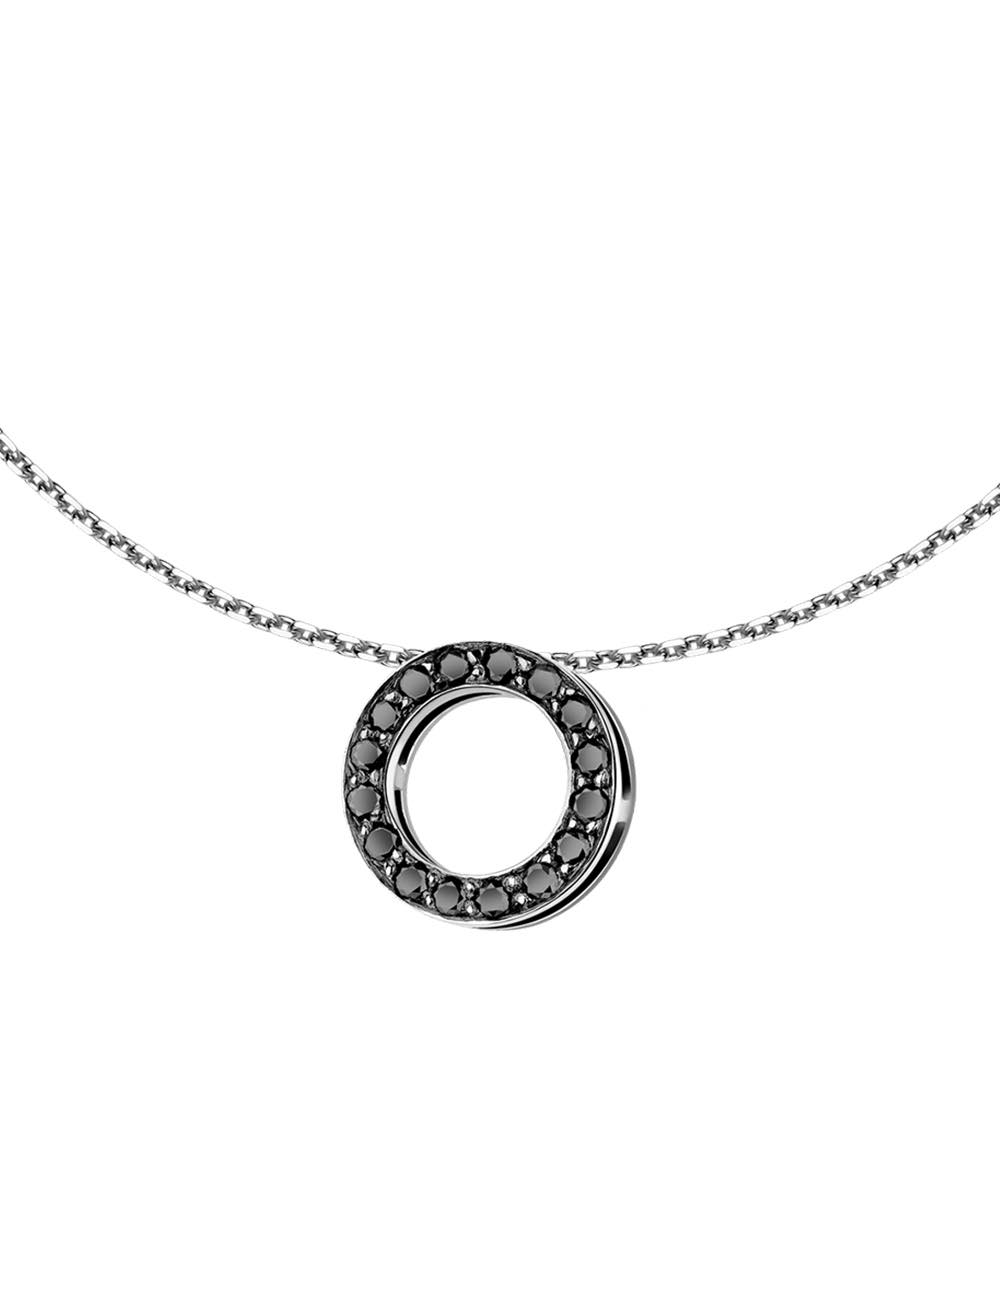 Women's Circle Necklace, a gift for yourself or others, modern and unique, in 750 white gold and black diamonds.